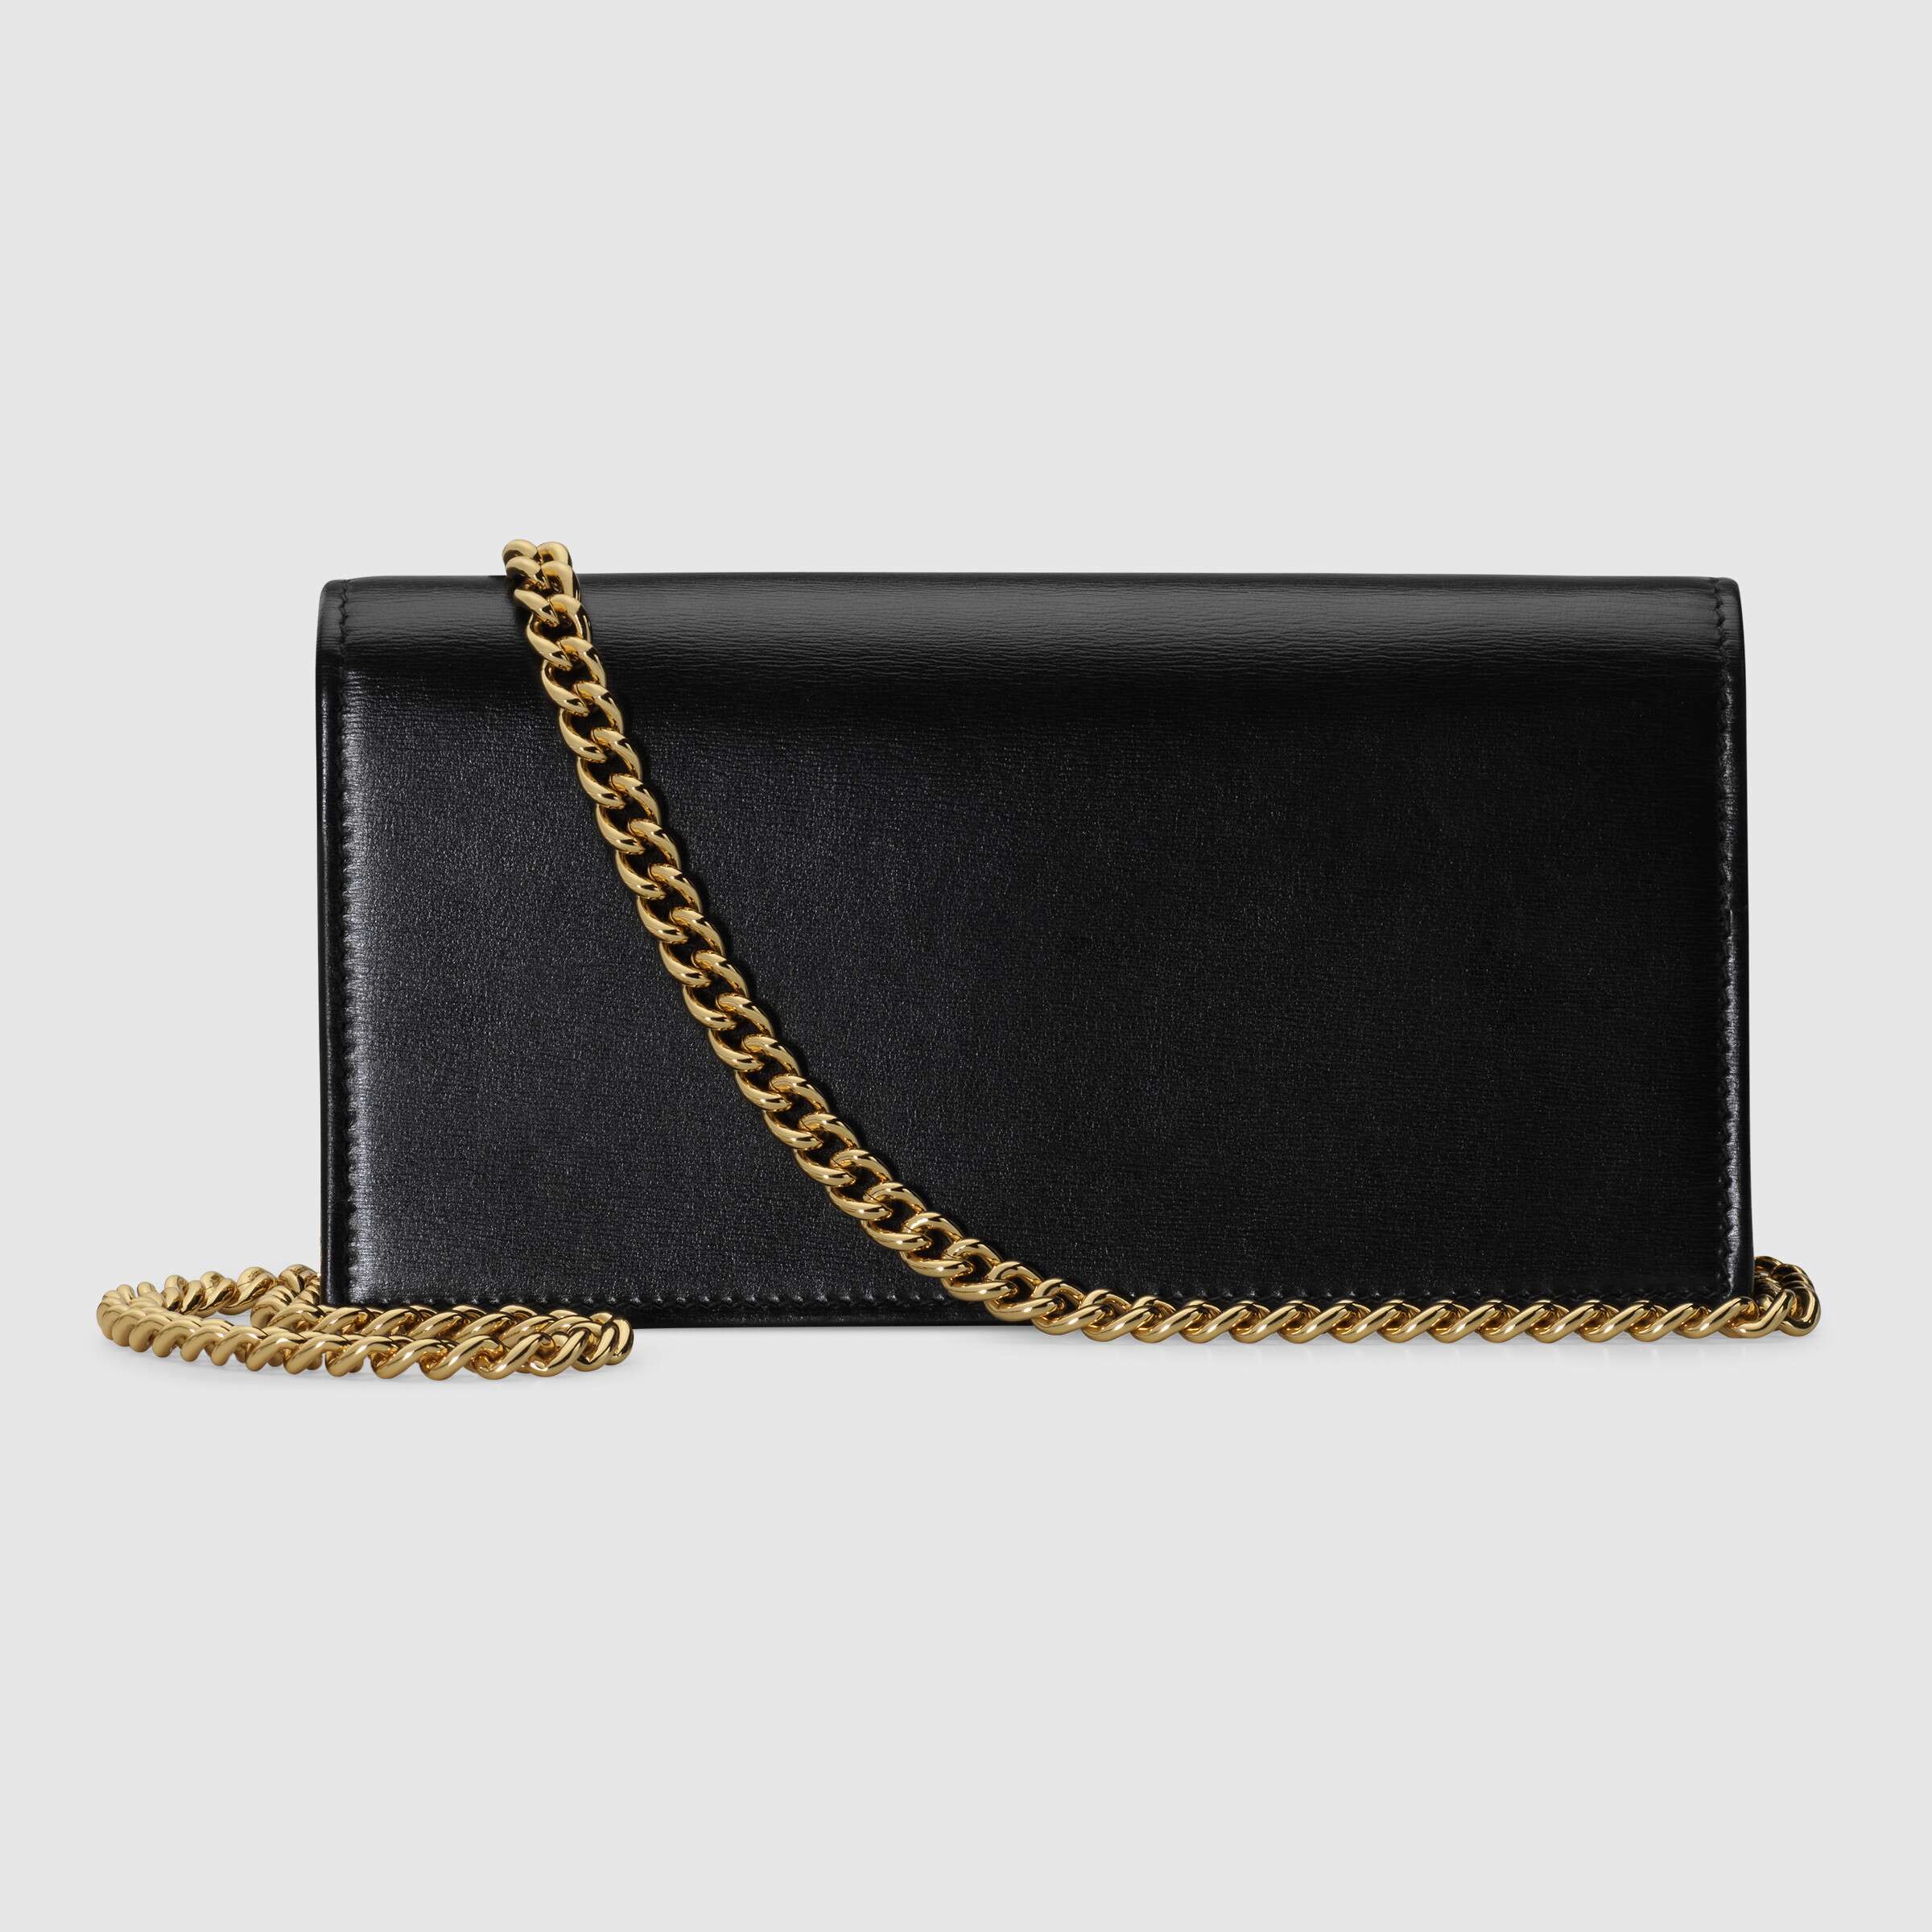 Gucci 1955 Horsebit Wallet With Chain Black